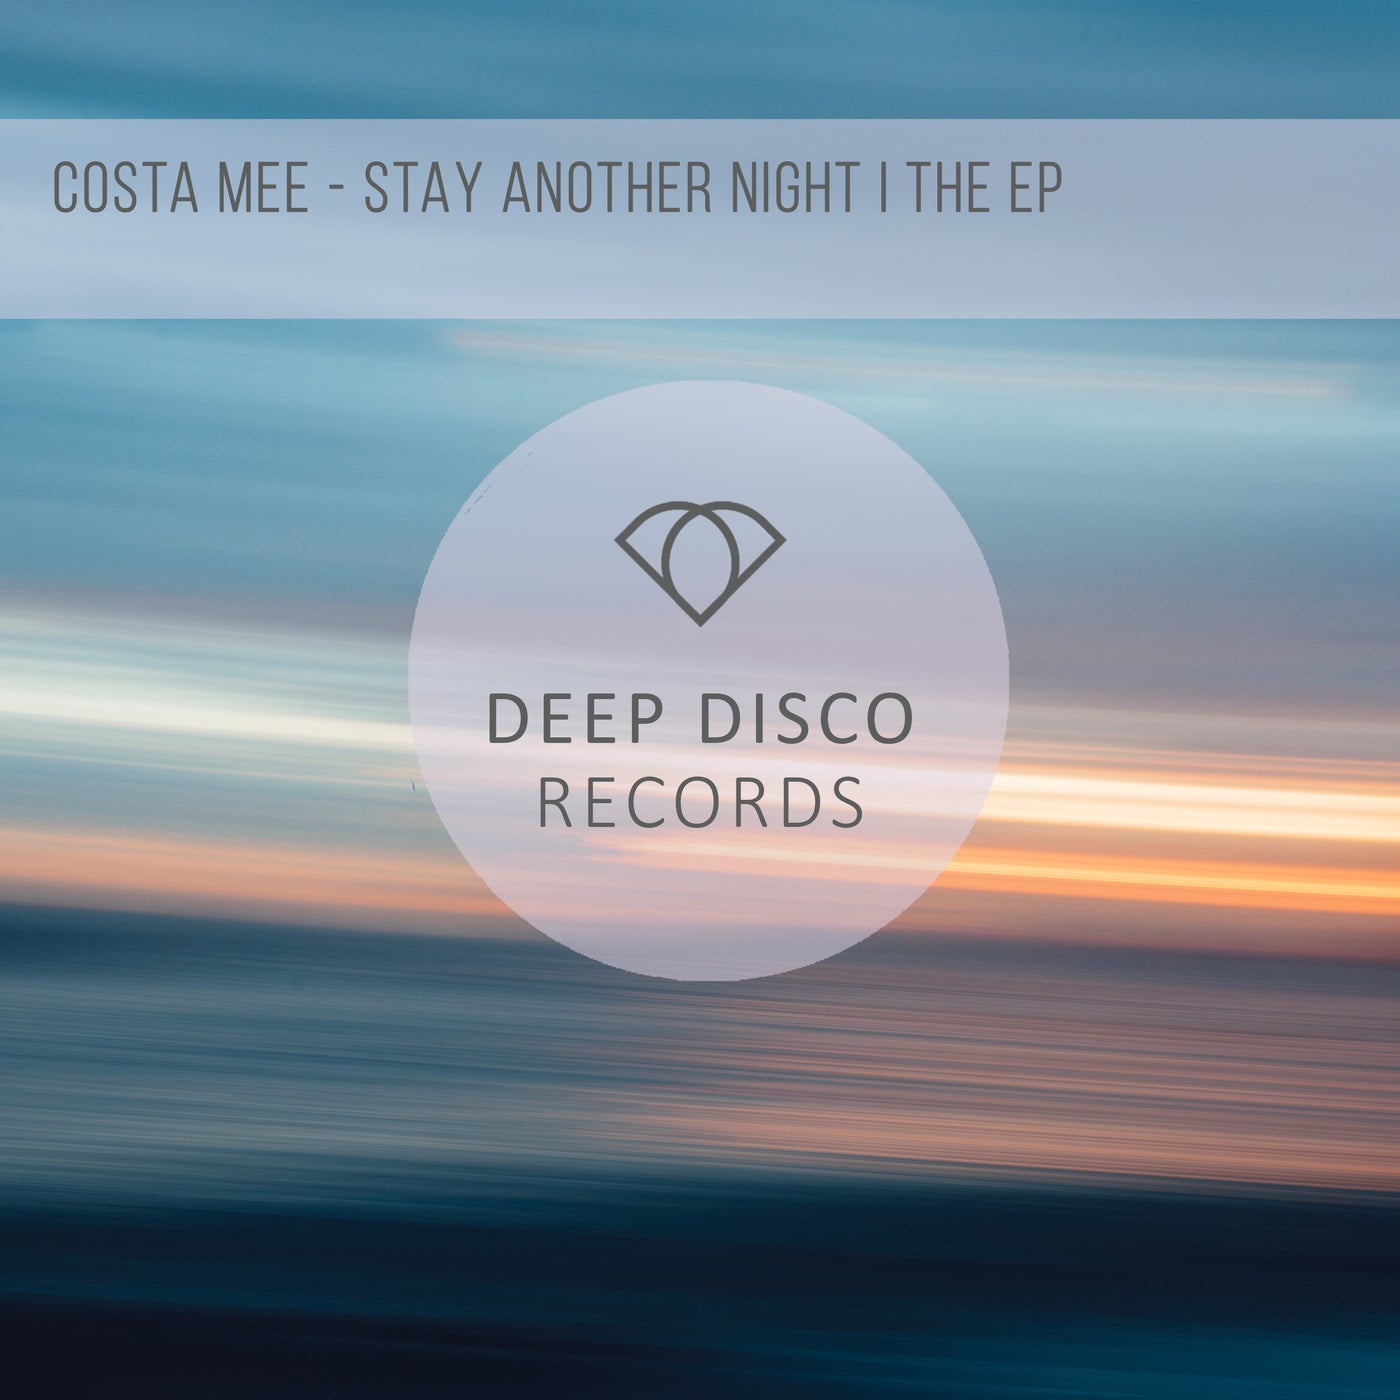 Costa mee love. Costa mee. Costa mee - a moment with you. Costa mee - around this World. Costa mee emotions Original Mix.